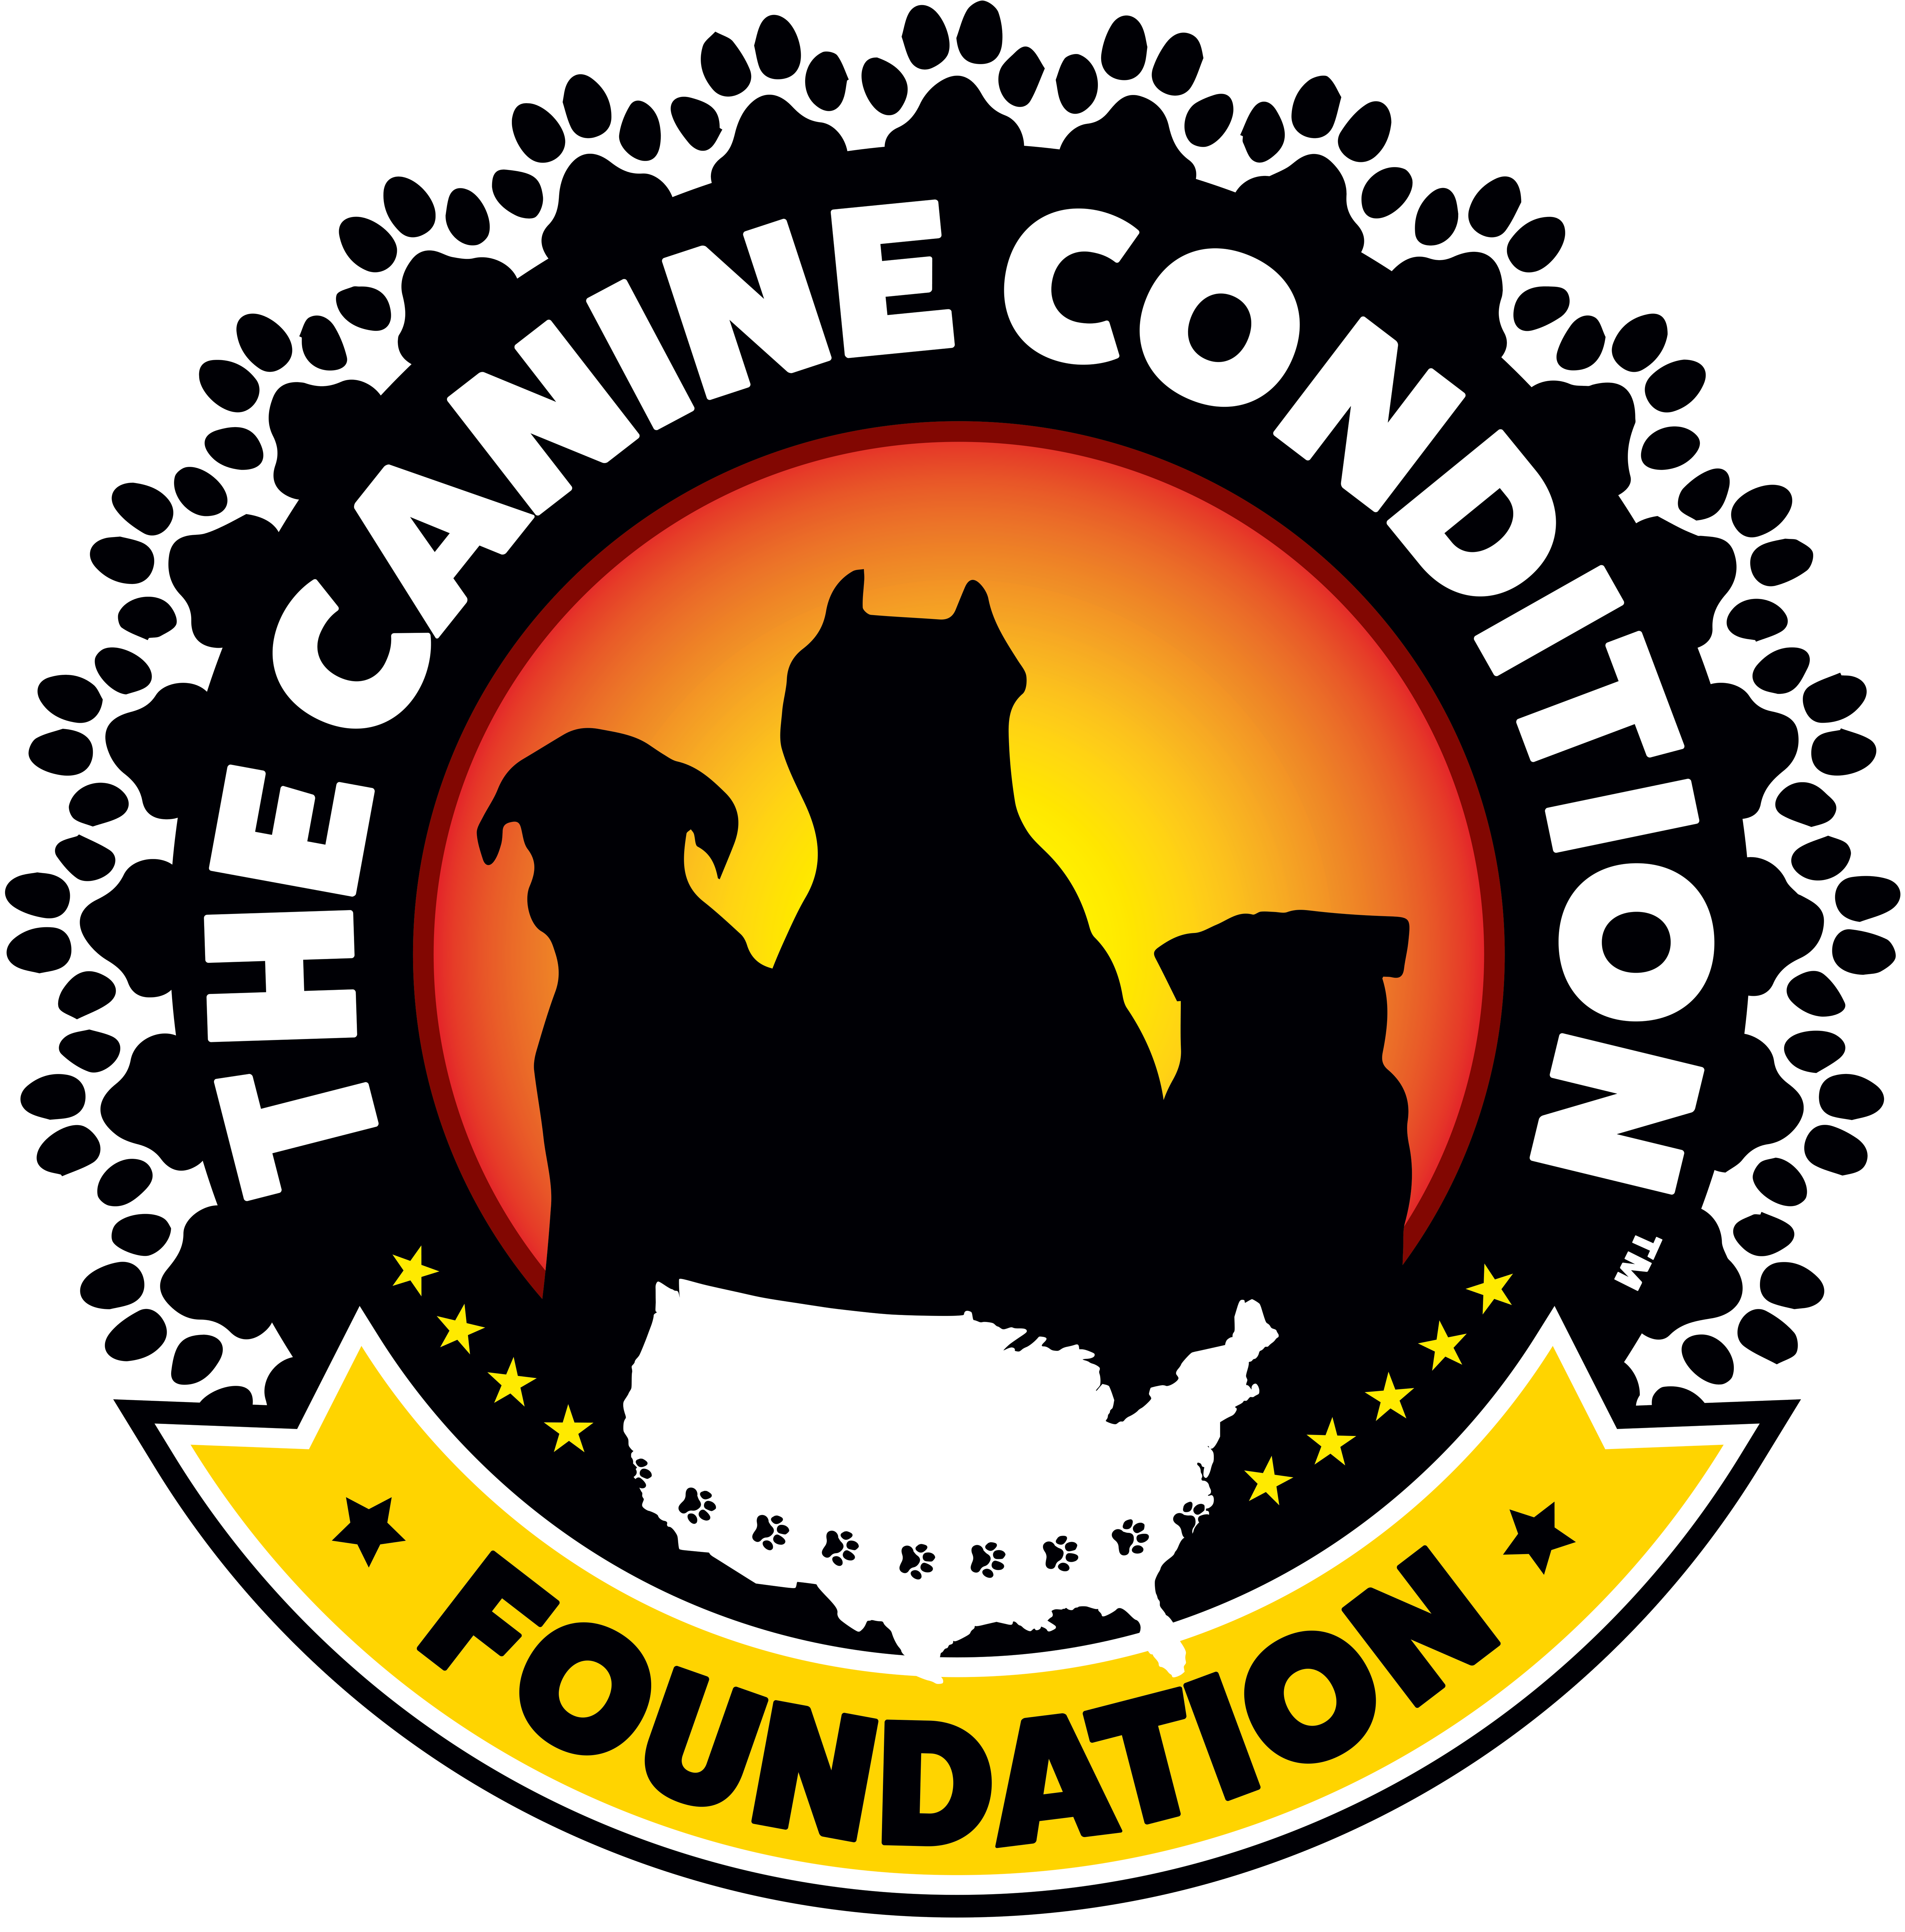 The Canine Condition Foundation General Fund - 100% of fund goes to spay/neuter surgeries for dog parents around the United States  - Help us reduce the homeless and abandoned dog population in the United States